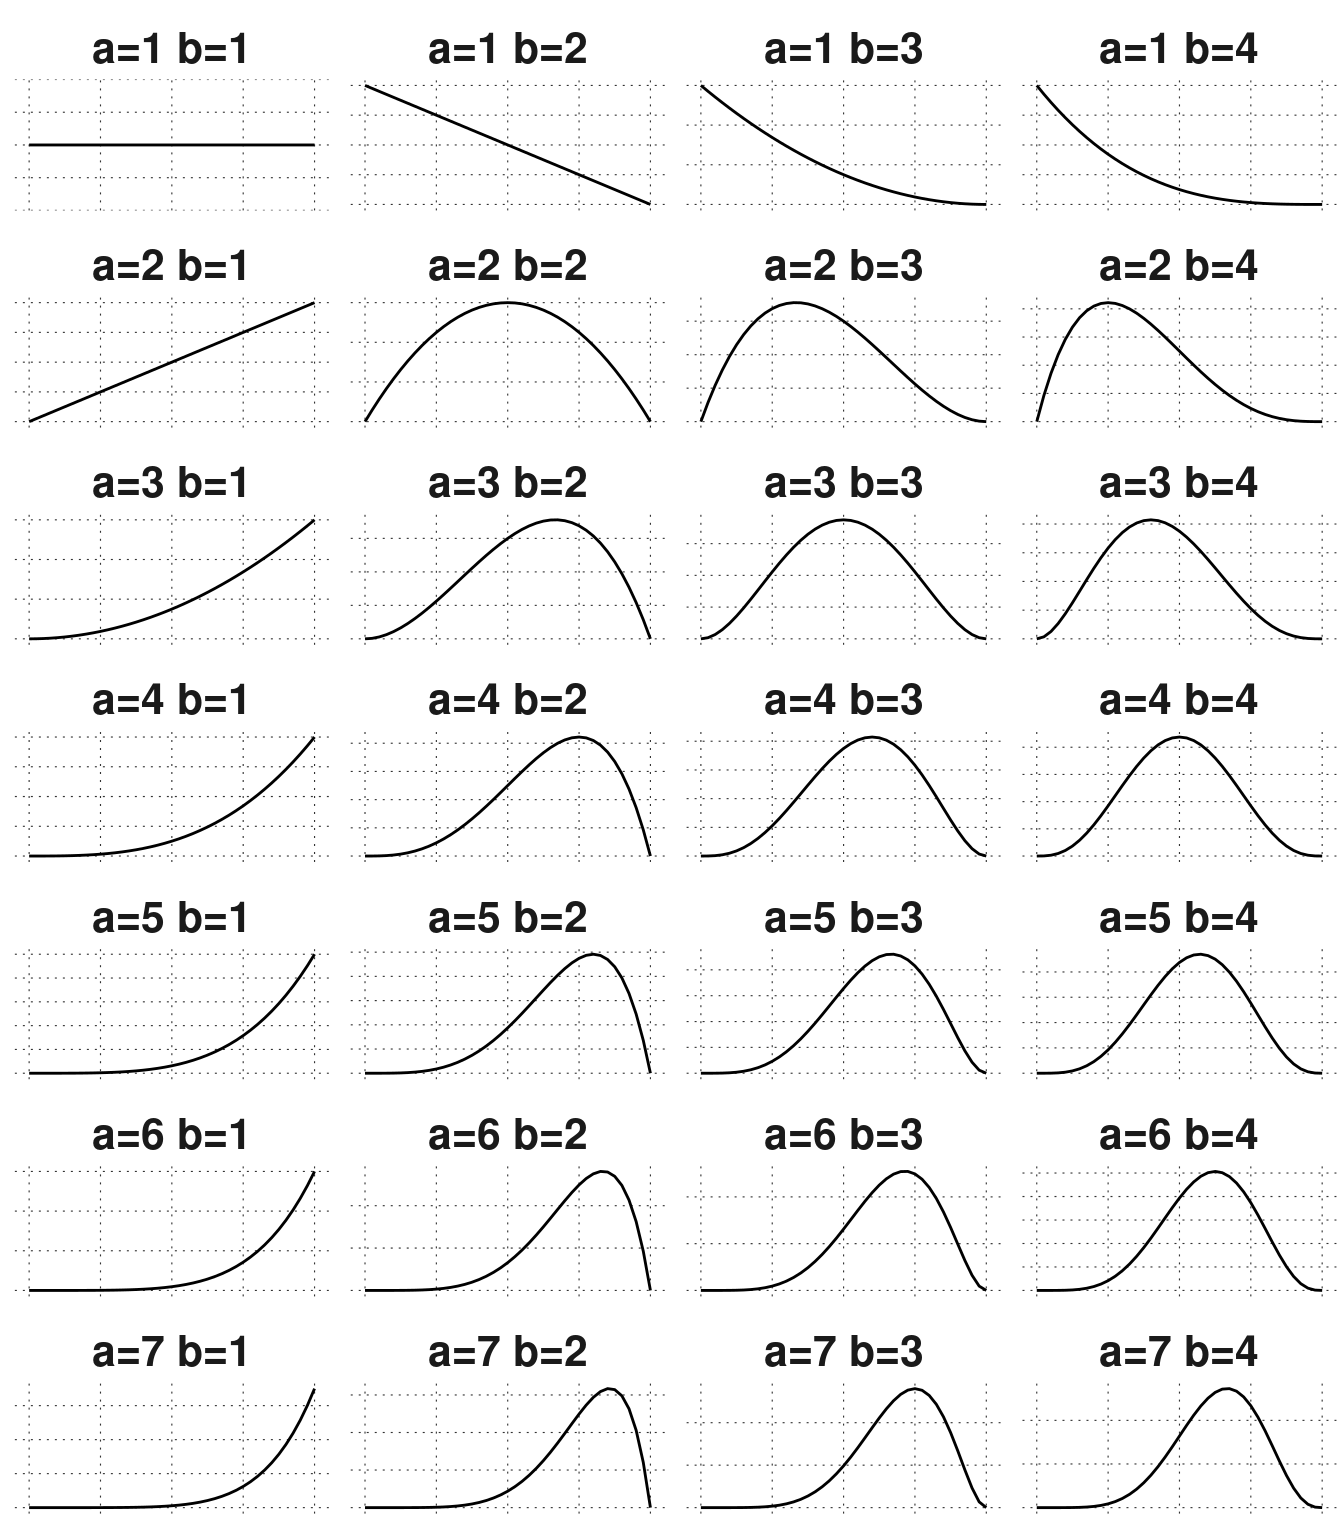 Beta distributions for different parameters. Starting from an uninformative prior (top left), we arrive at the posterior distribution in the bottom left, in any sequence of sequentially updating with the data.